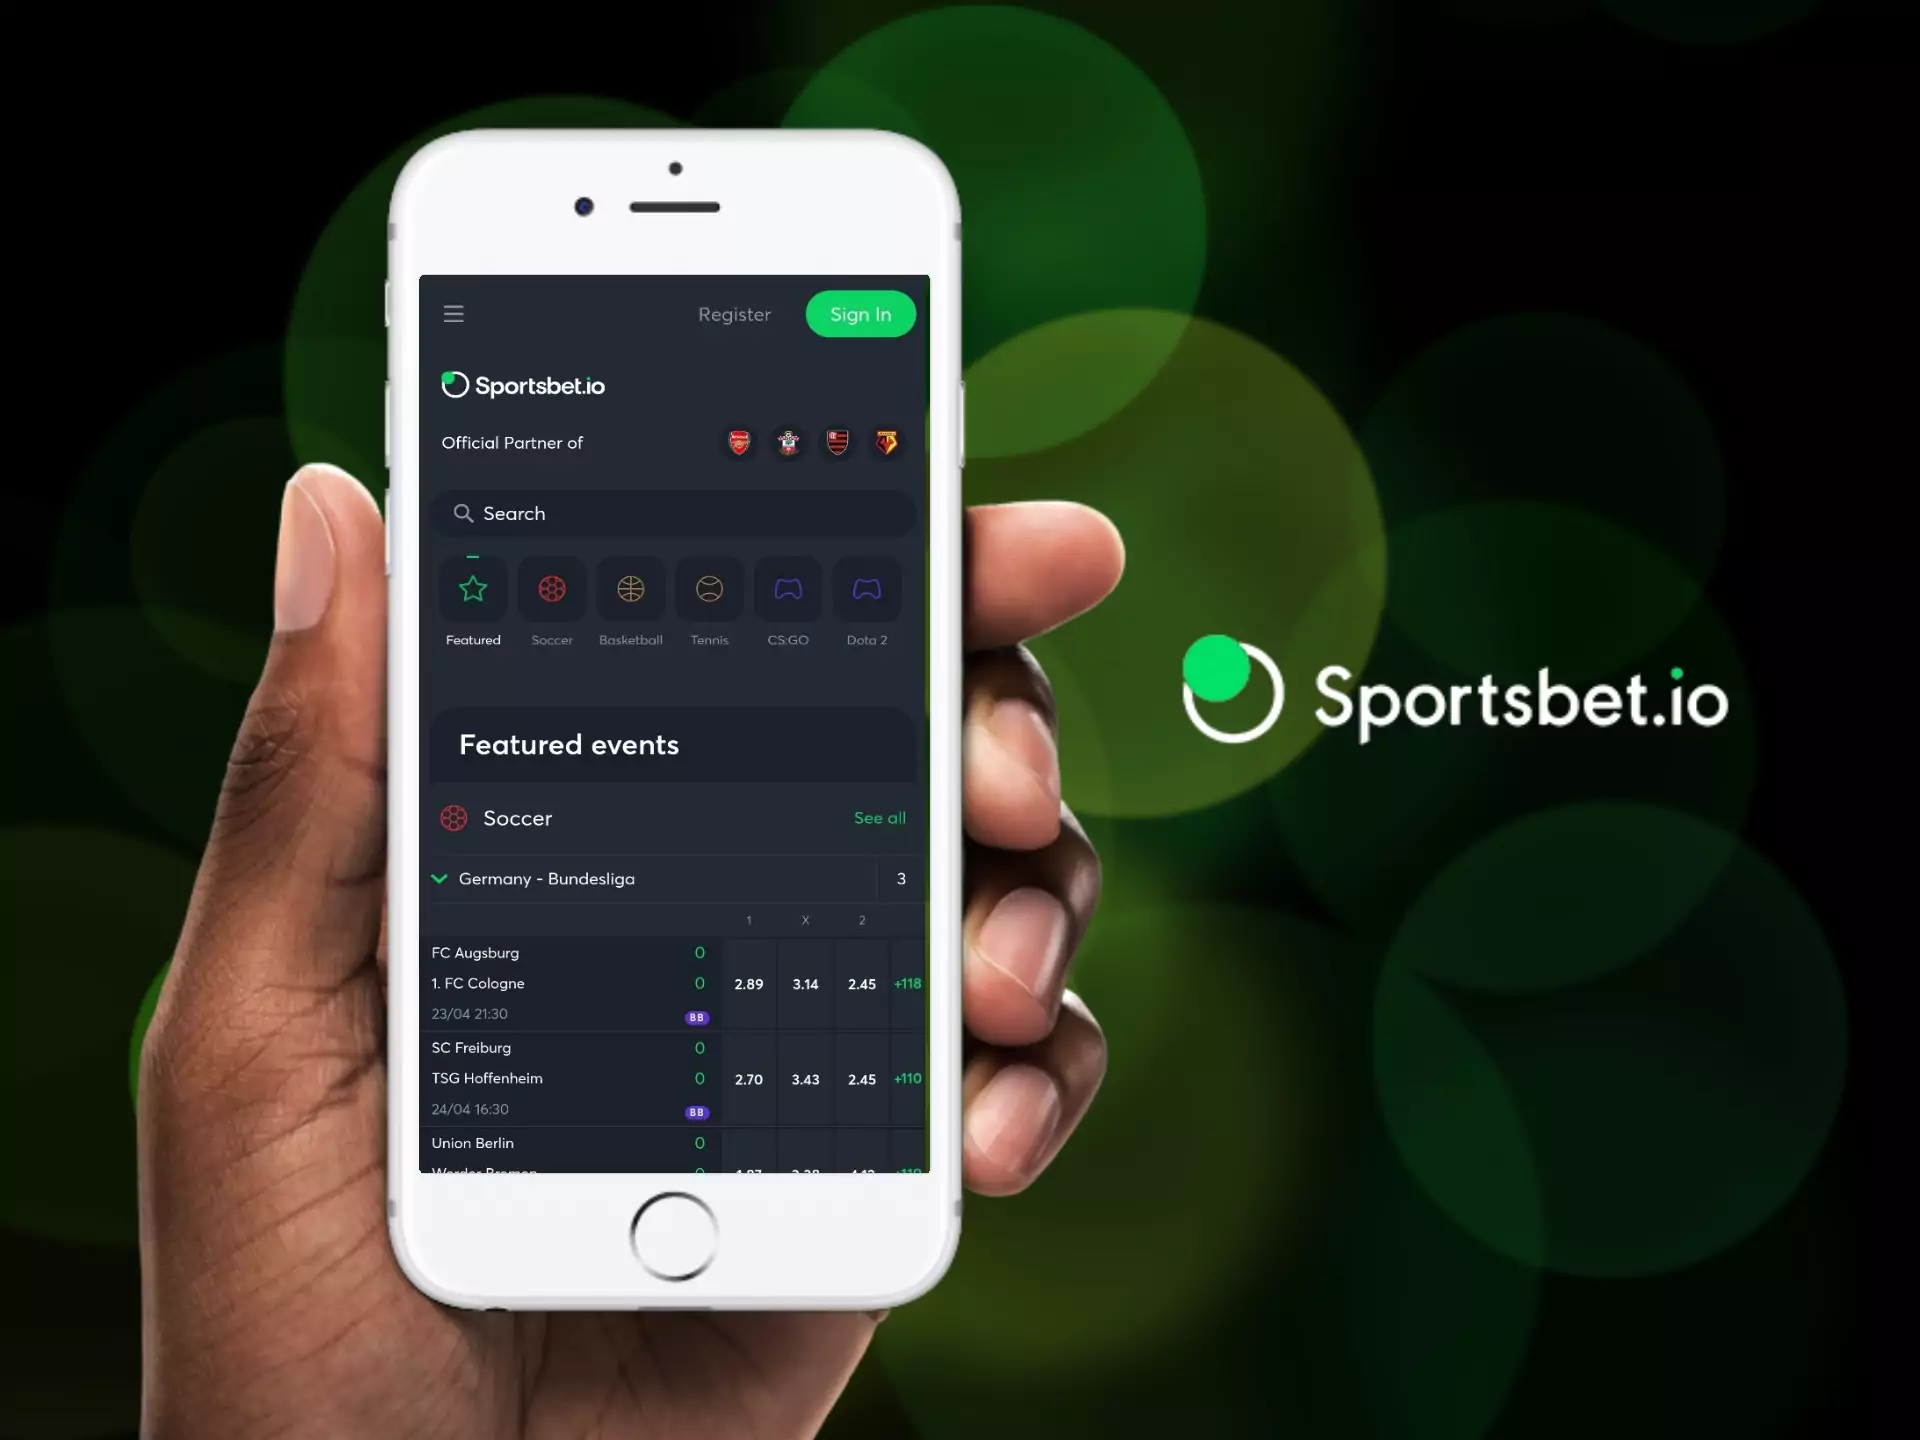 If you don't want to install the app you can visit the mobile version of the Sportsbet site.